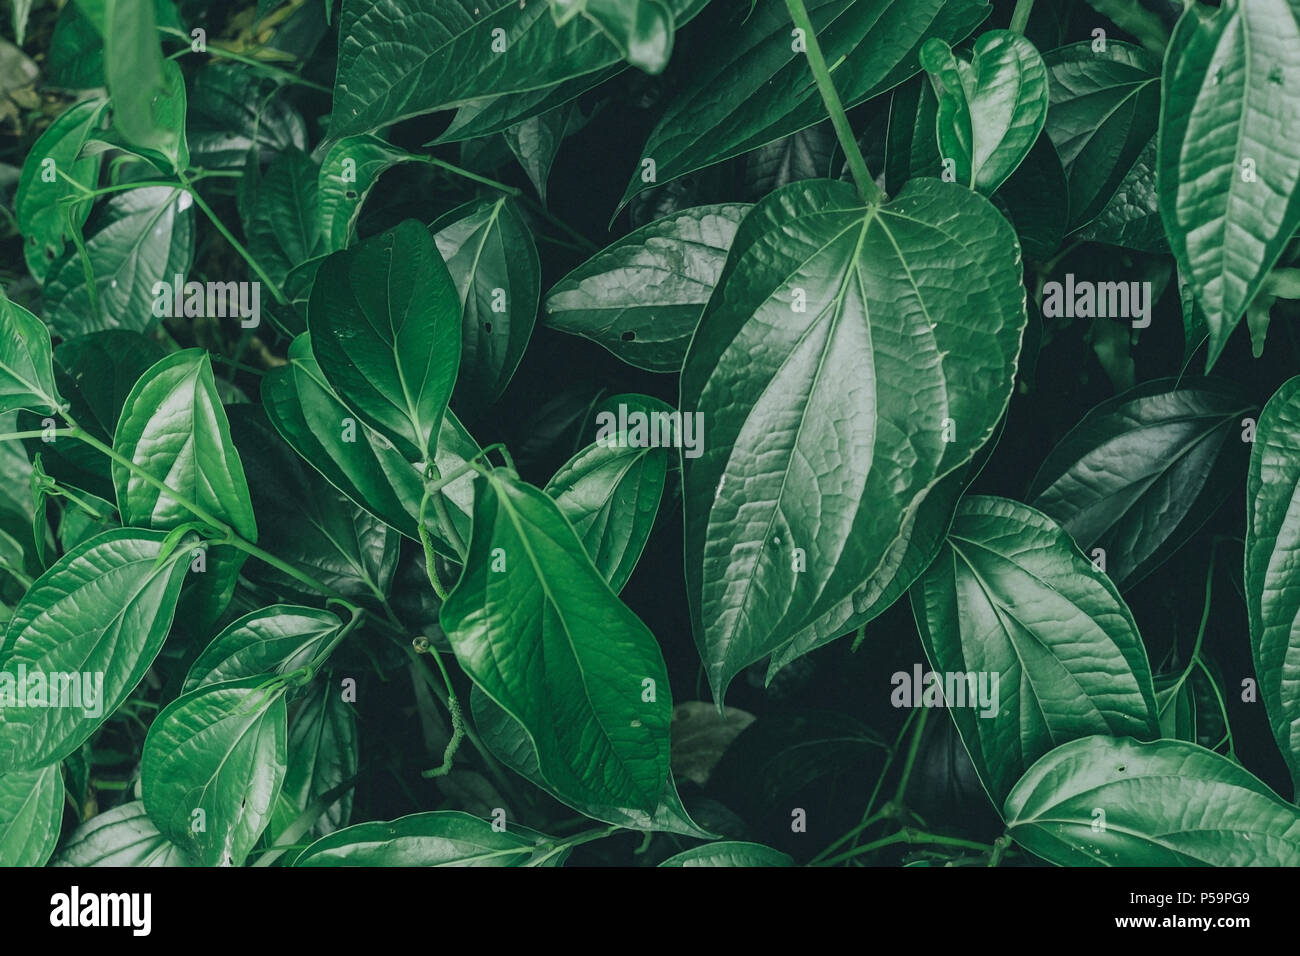 Dark and greenery leaves and background from tropical leaves, Close-up of greenery leaf and group of dark leaves and floral. Stock Photo